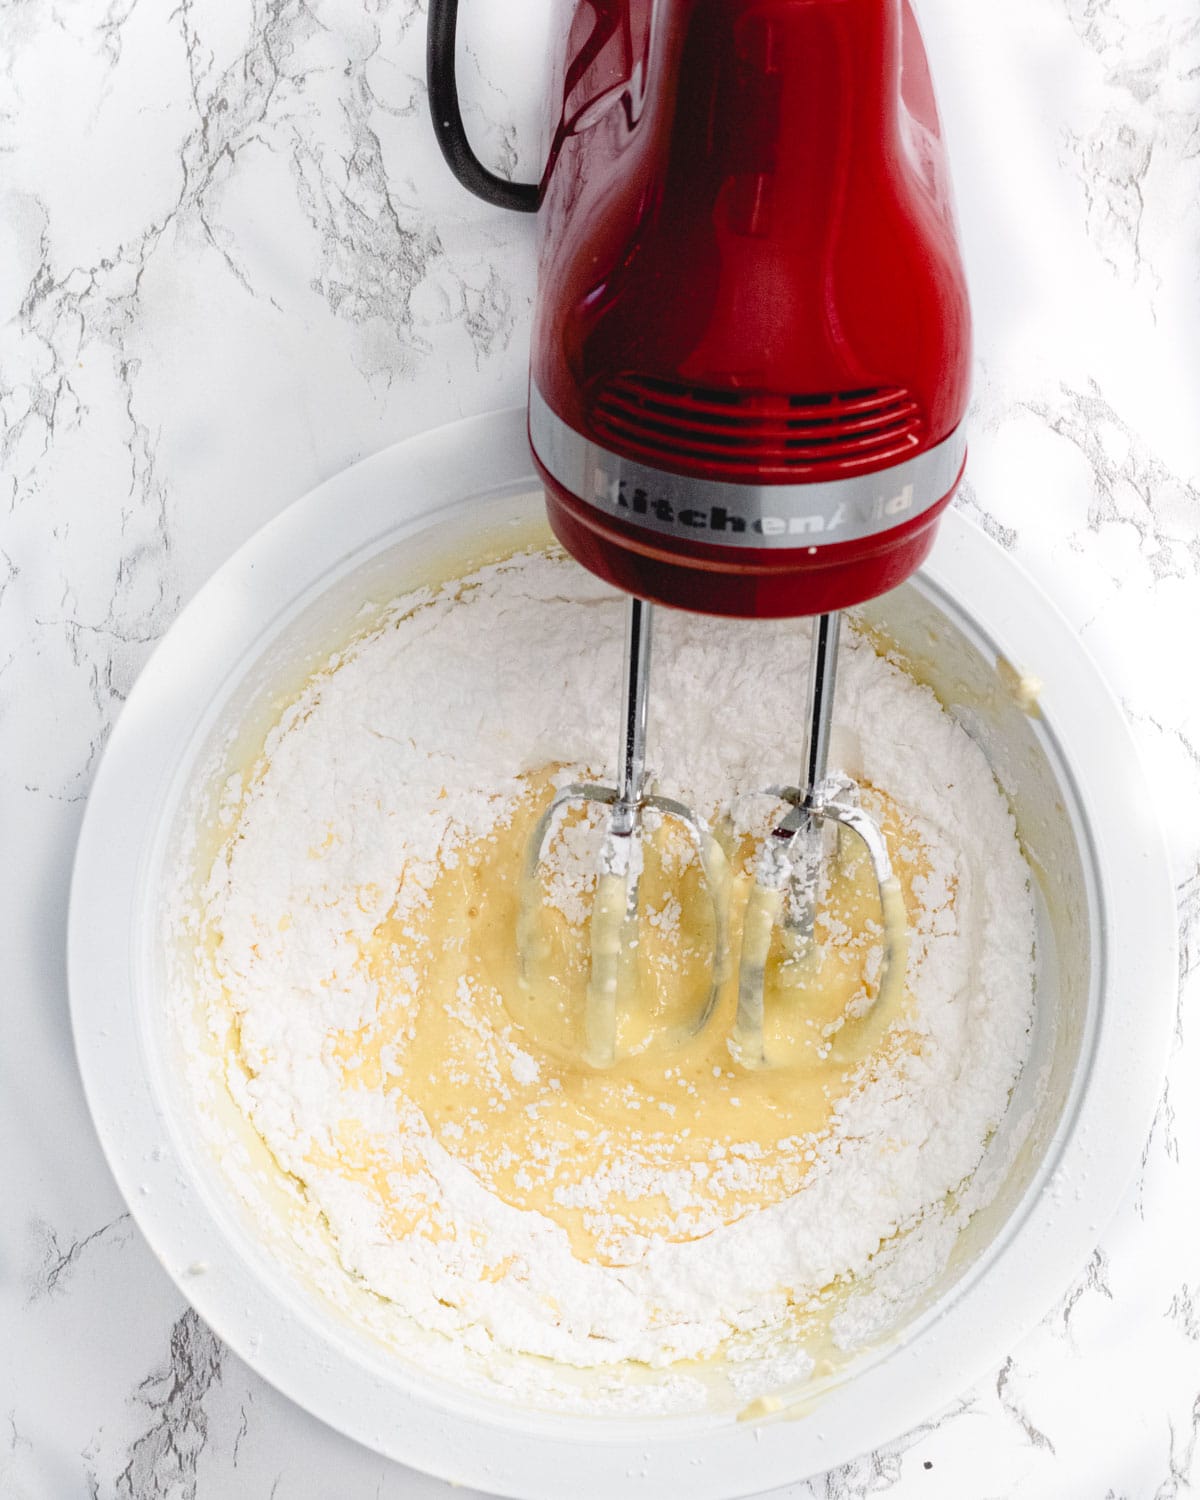 Blending the filling with a red Kitchen Aid hand mixer.